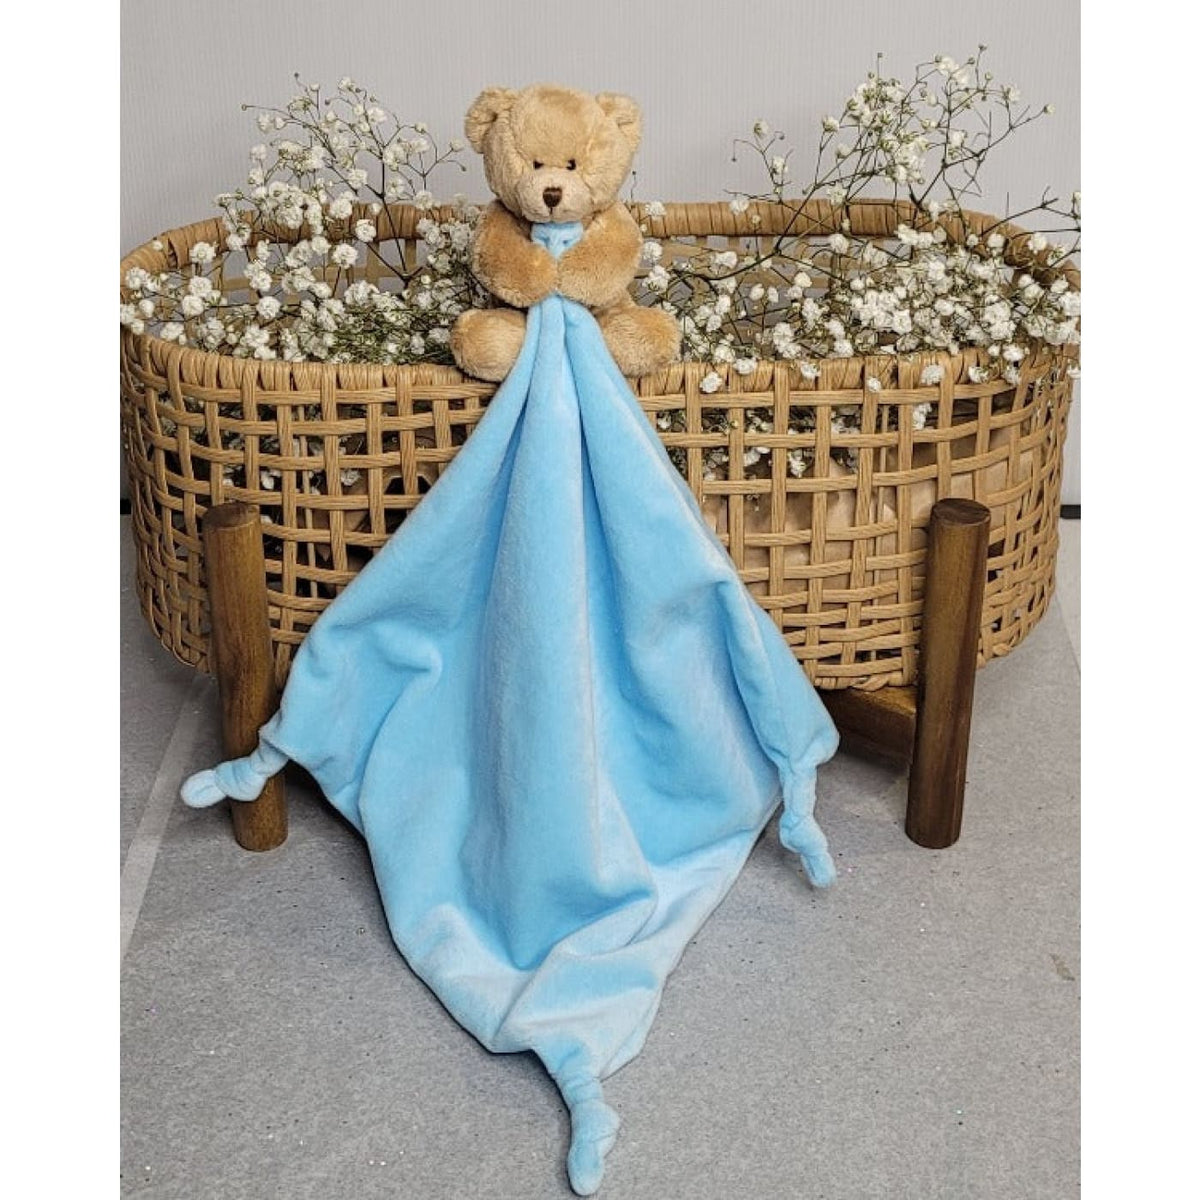 Petite Vous Comfort Blanket Bailey the Bear - Bear - TOYS &amp; PLAY - BLANKIES/COMFORTERS/RATTLES